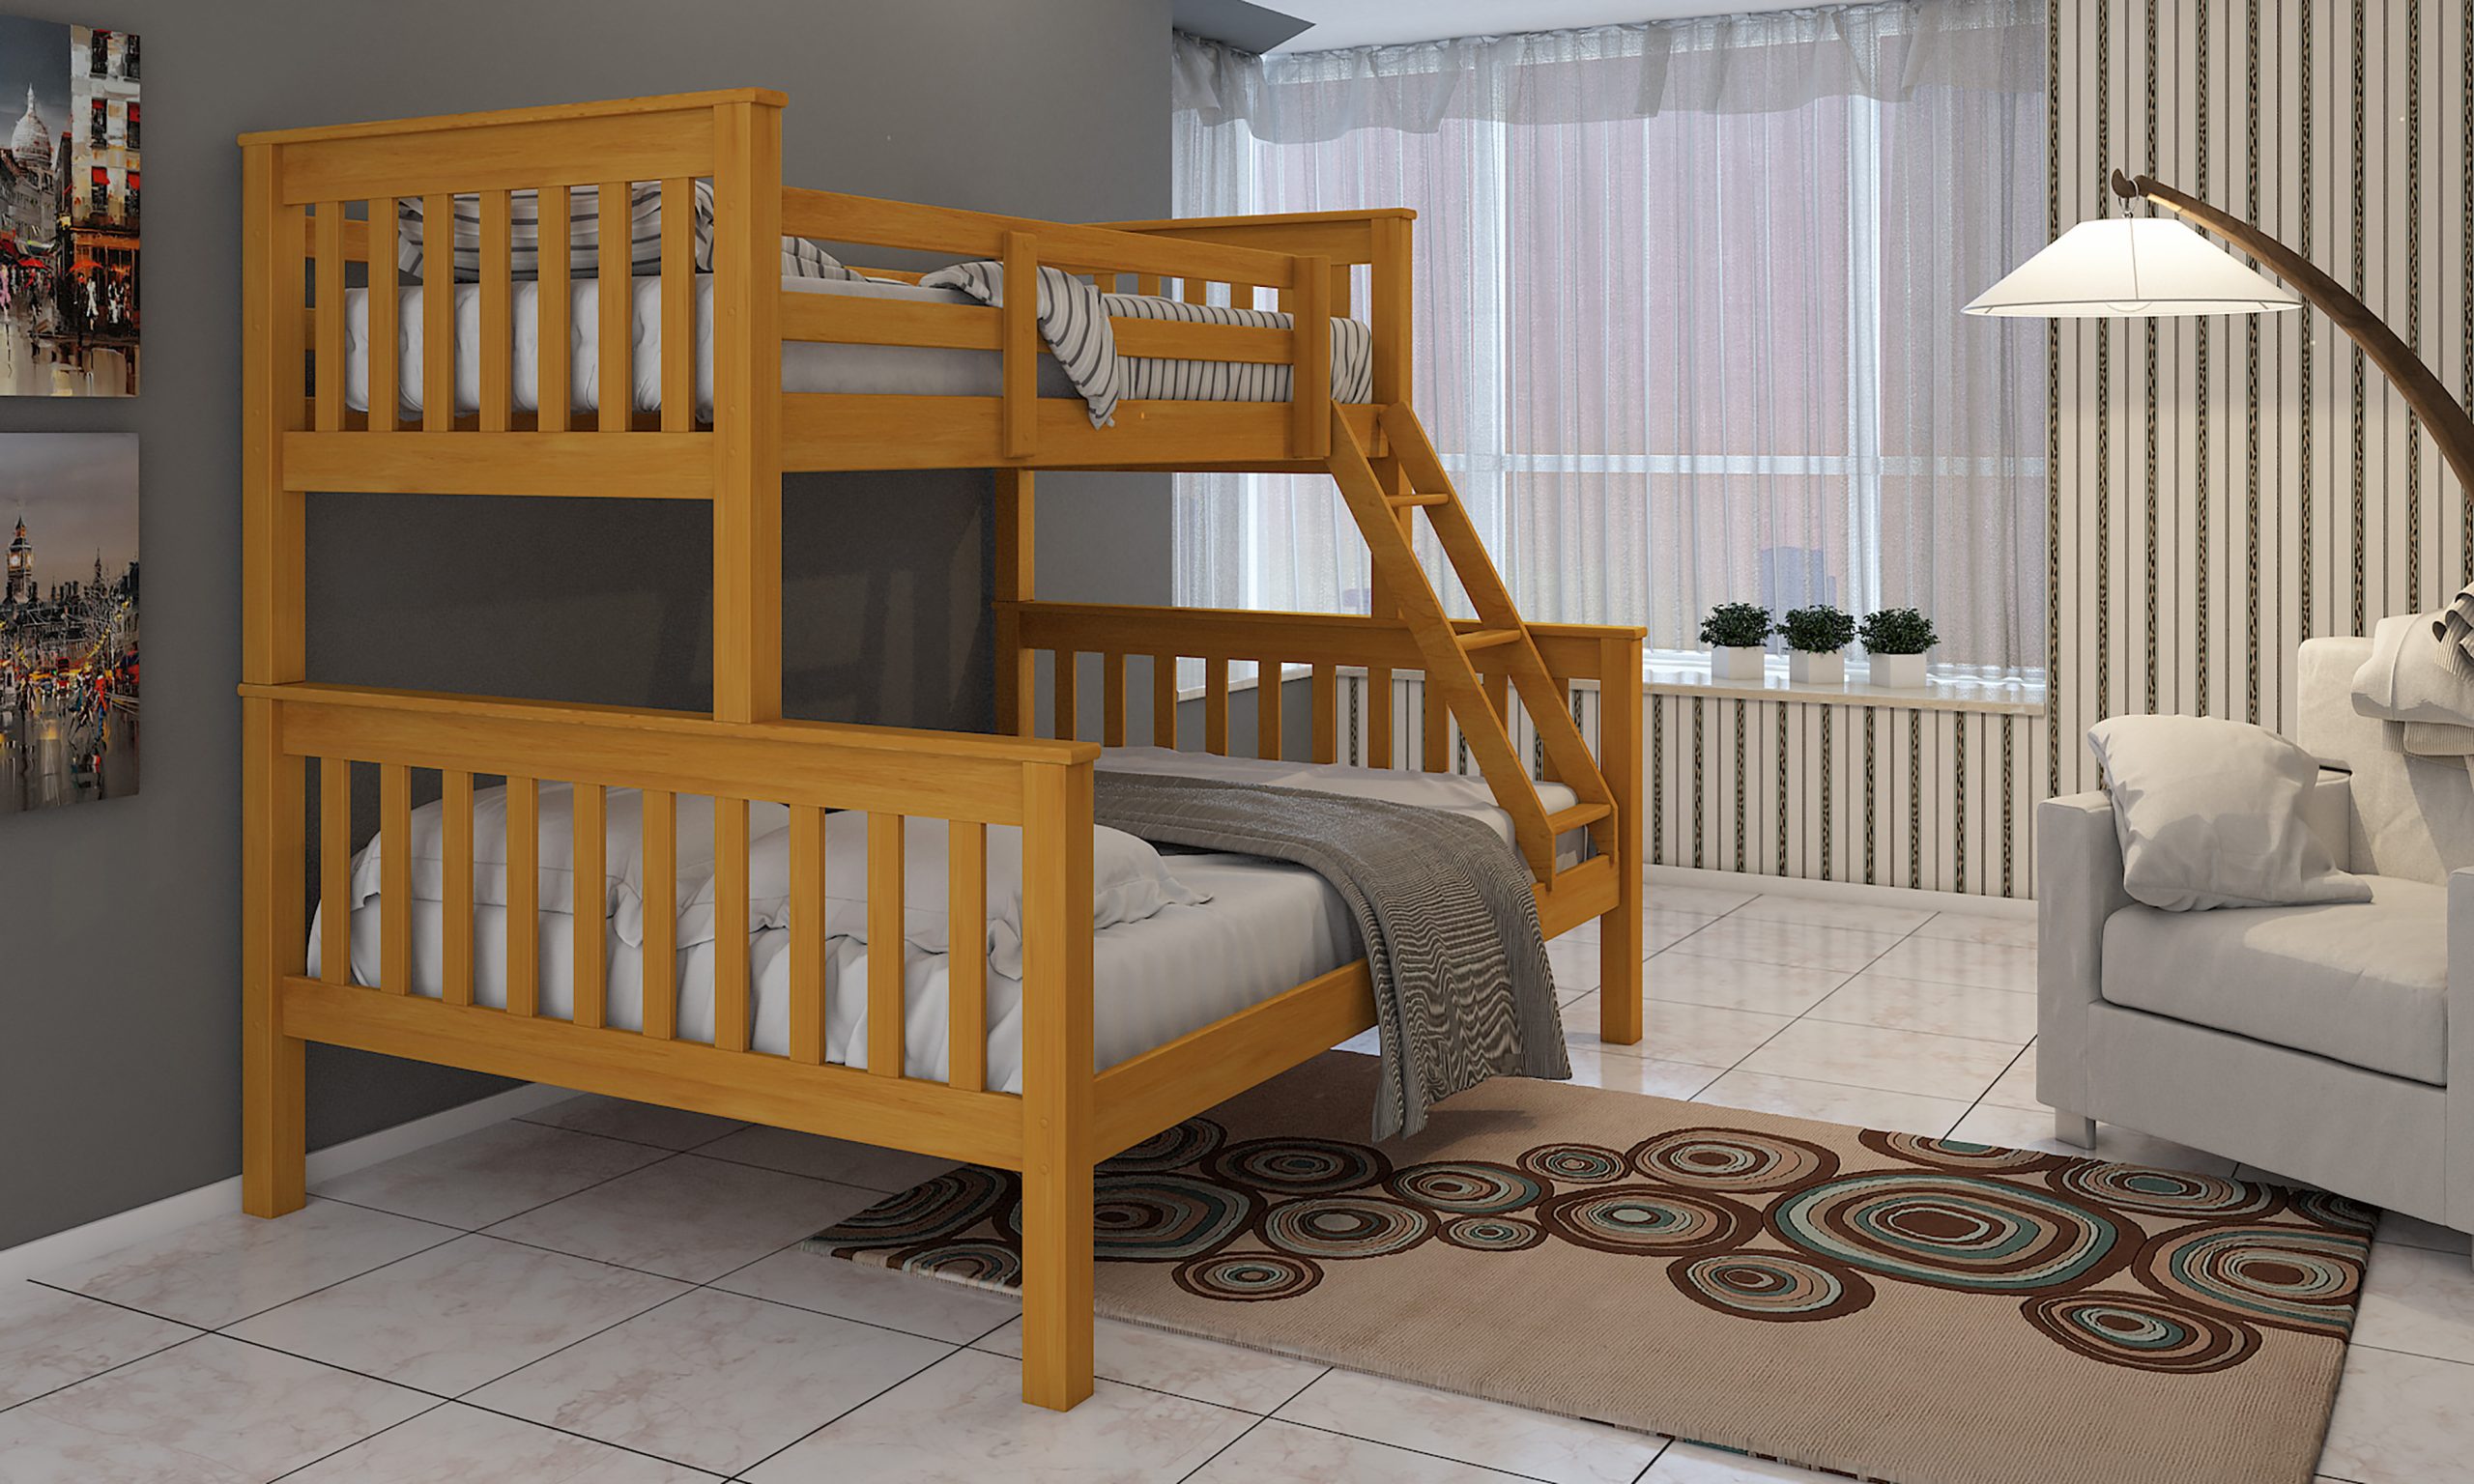 Mission bunk bed